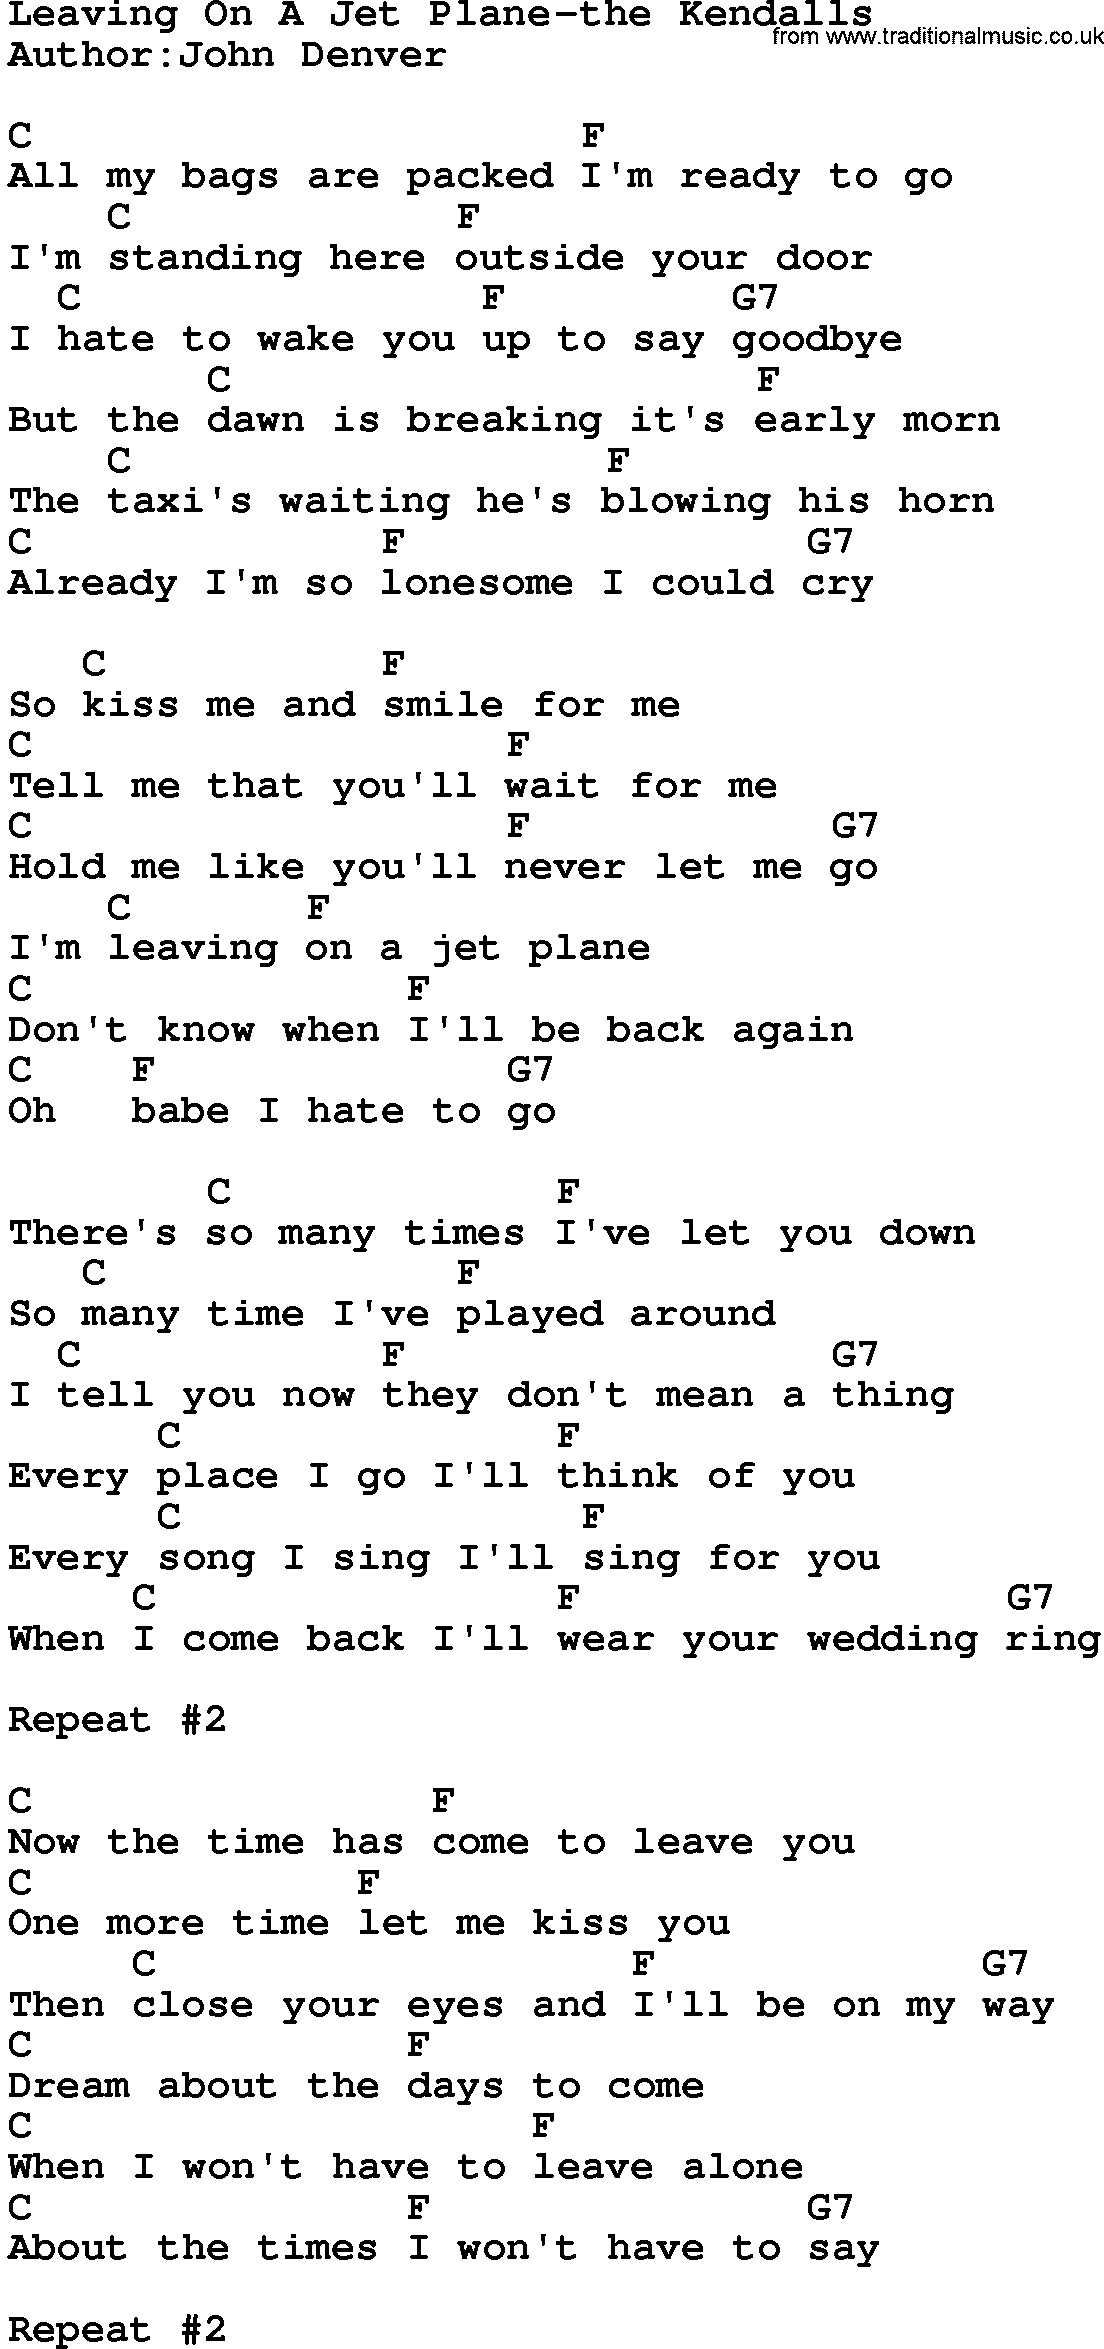 Country Music:Leaving On A Plane-The Kendalls Lyrics and Chords